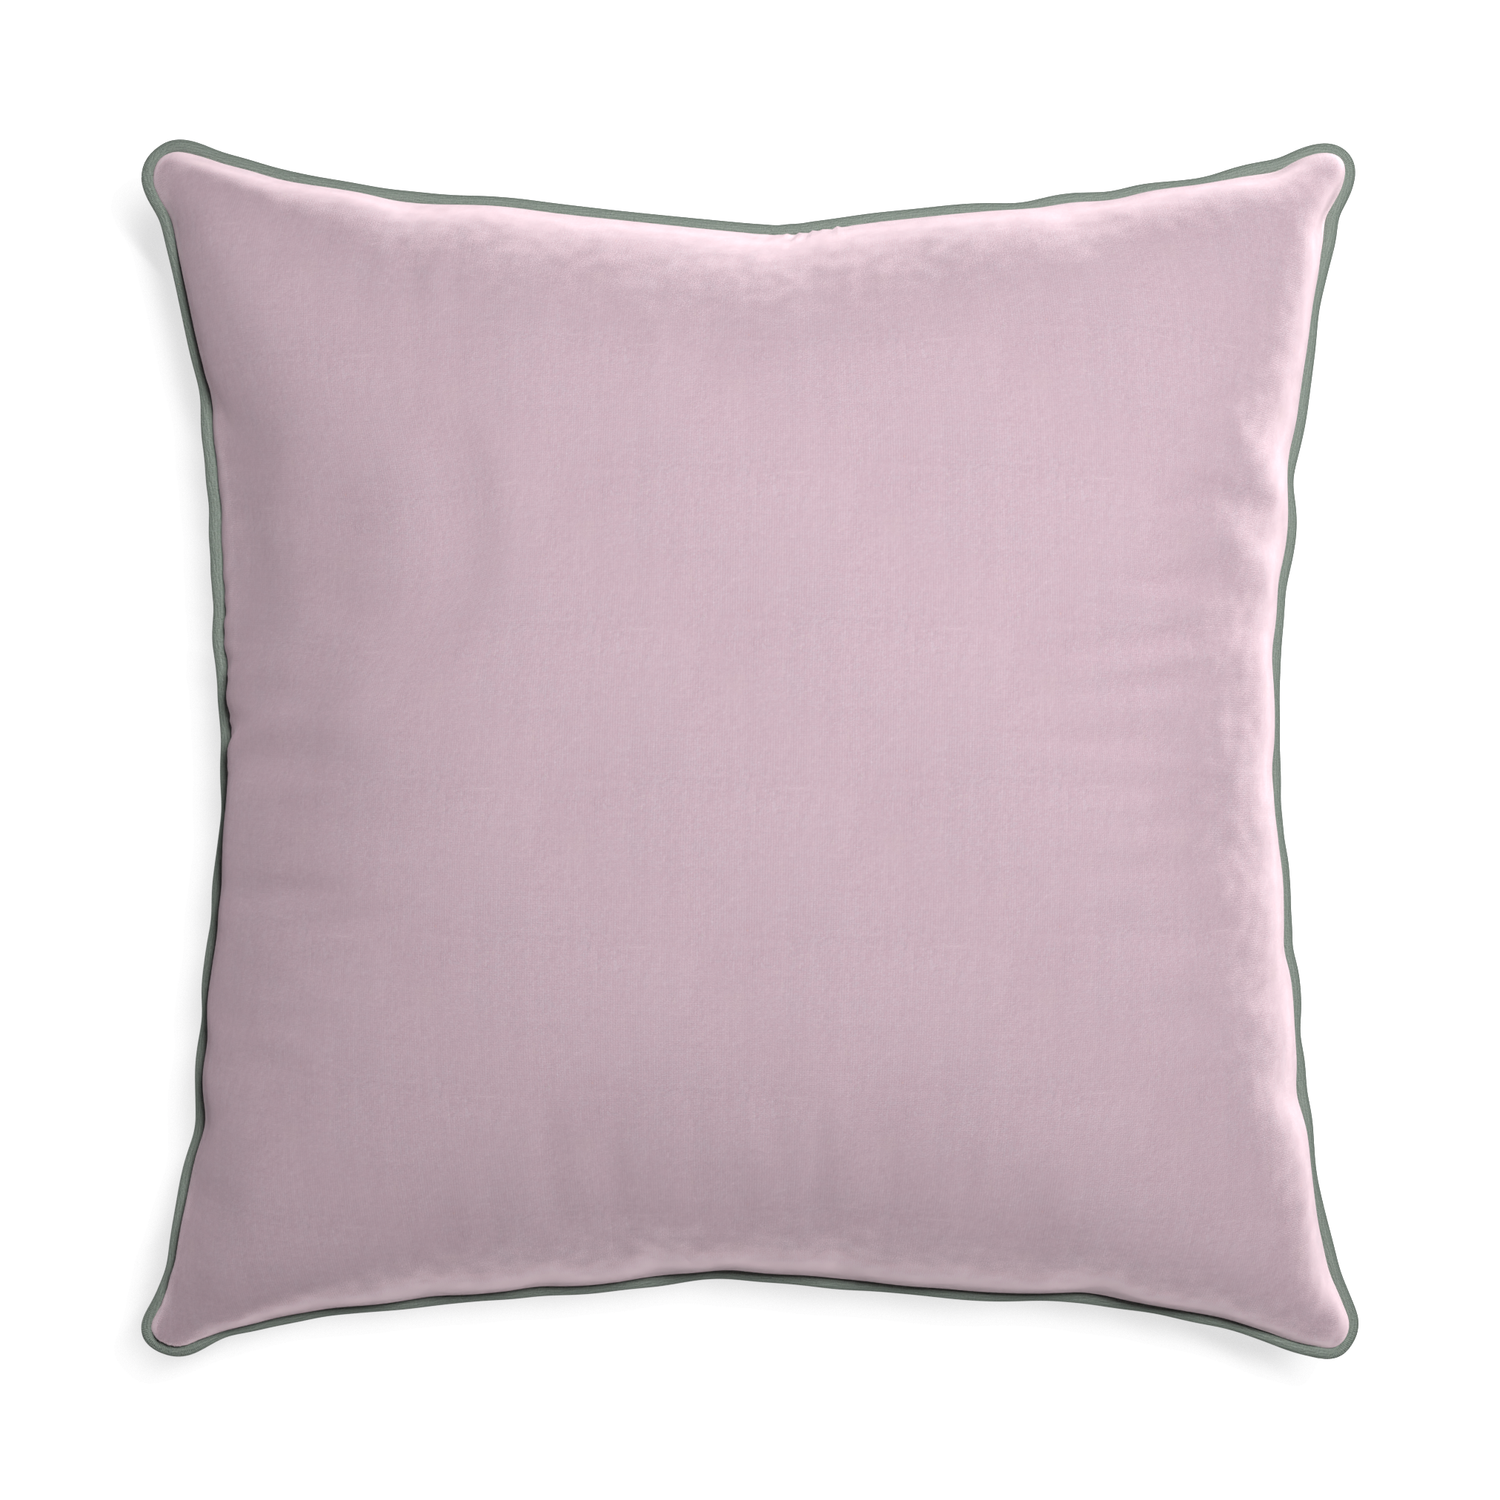 Euro-sham lilac velvet custom lilacpillow with sage piping on white background